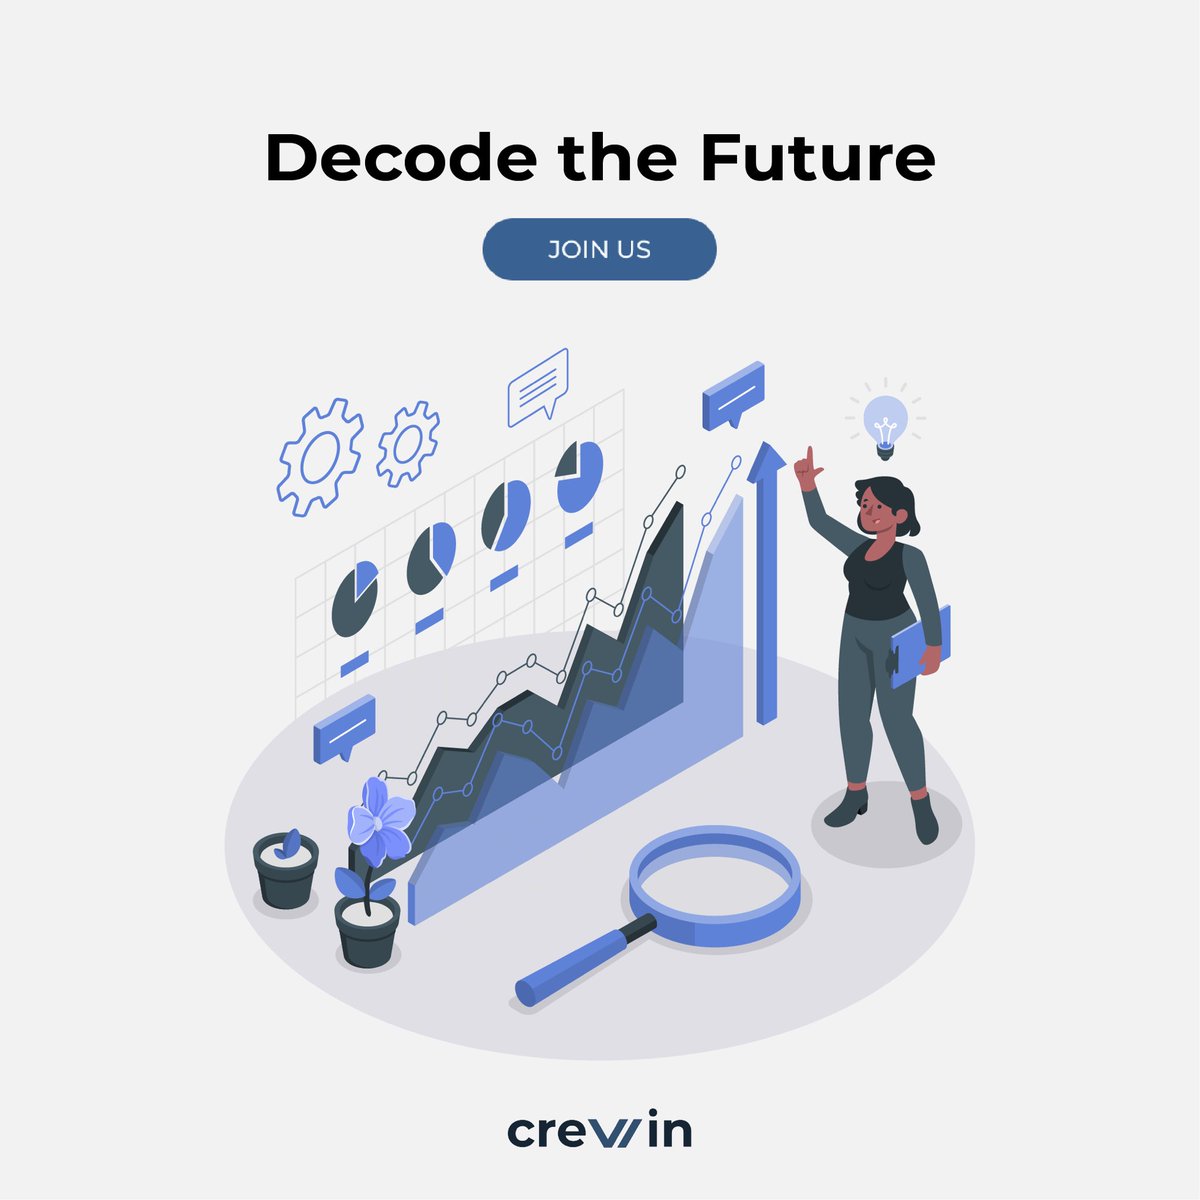 Unlock boundless opportunities and navigate the future with CreWin ⛵️
Decode the Future with us! #CreWin #MaritimeInnovation